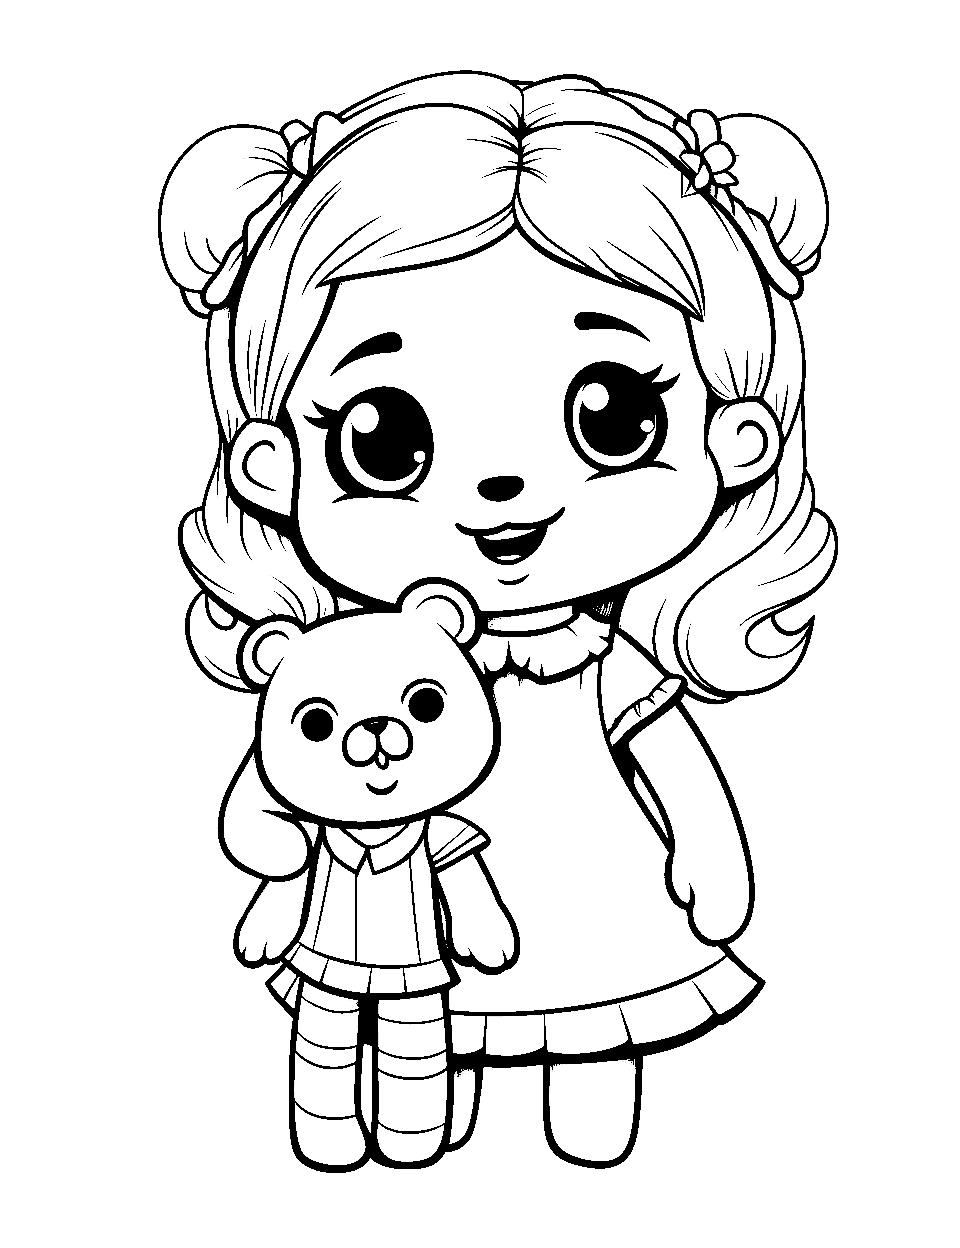 Plush Companion Five Nights at Freddys Coloring Page - A human-looking character with a cute plush companion.